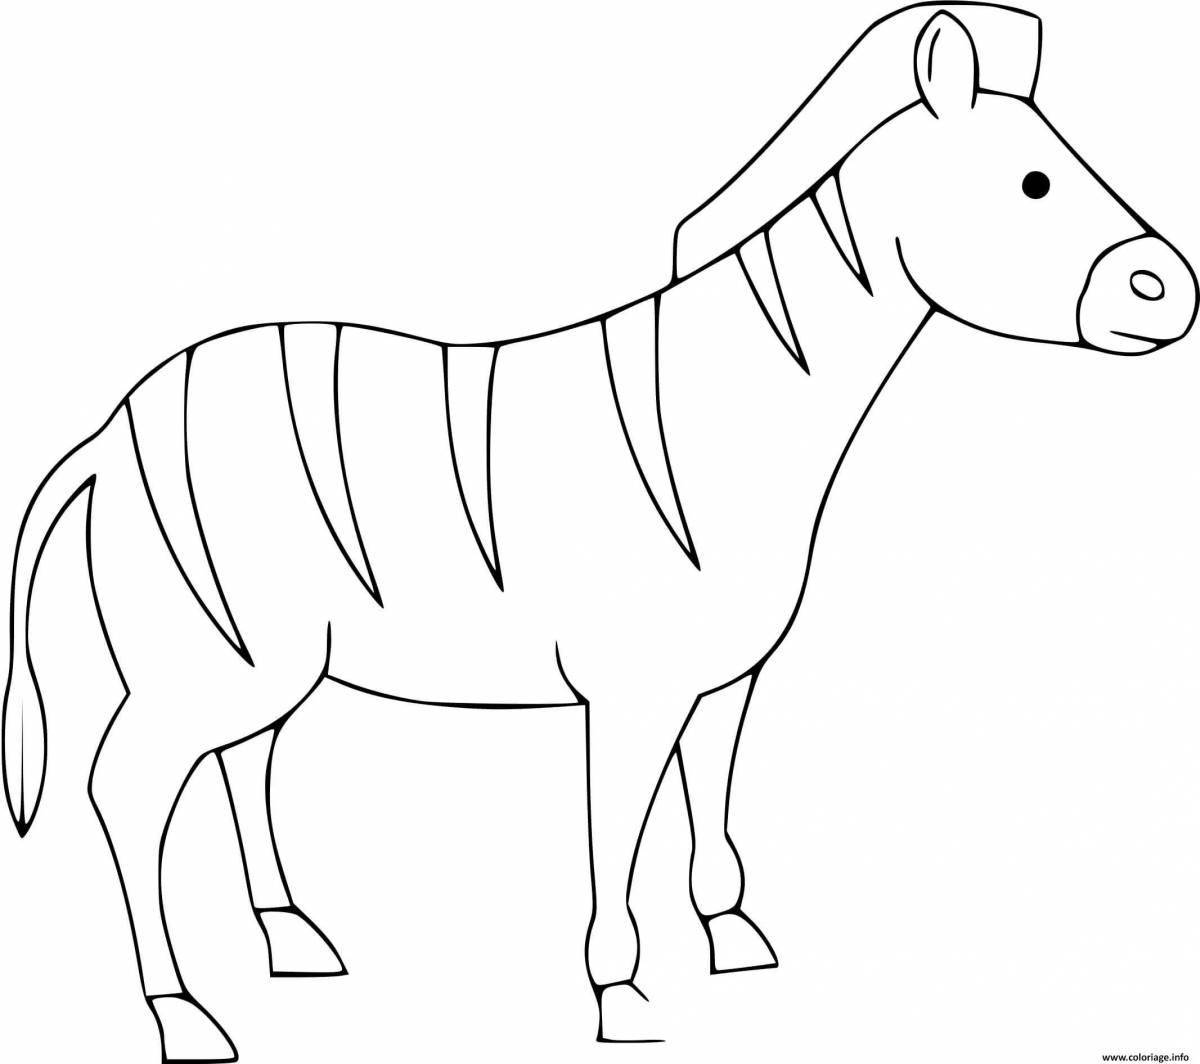 Children's colorful zebra without stripes